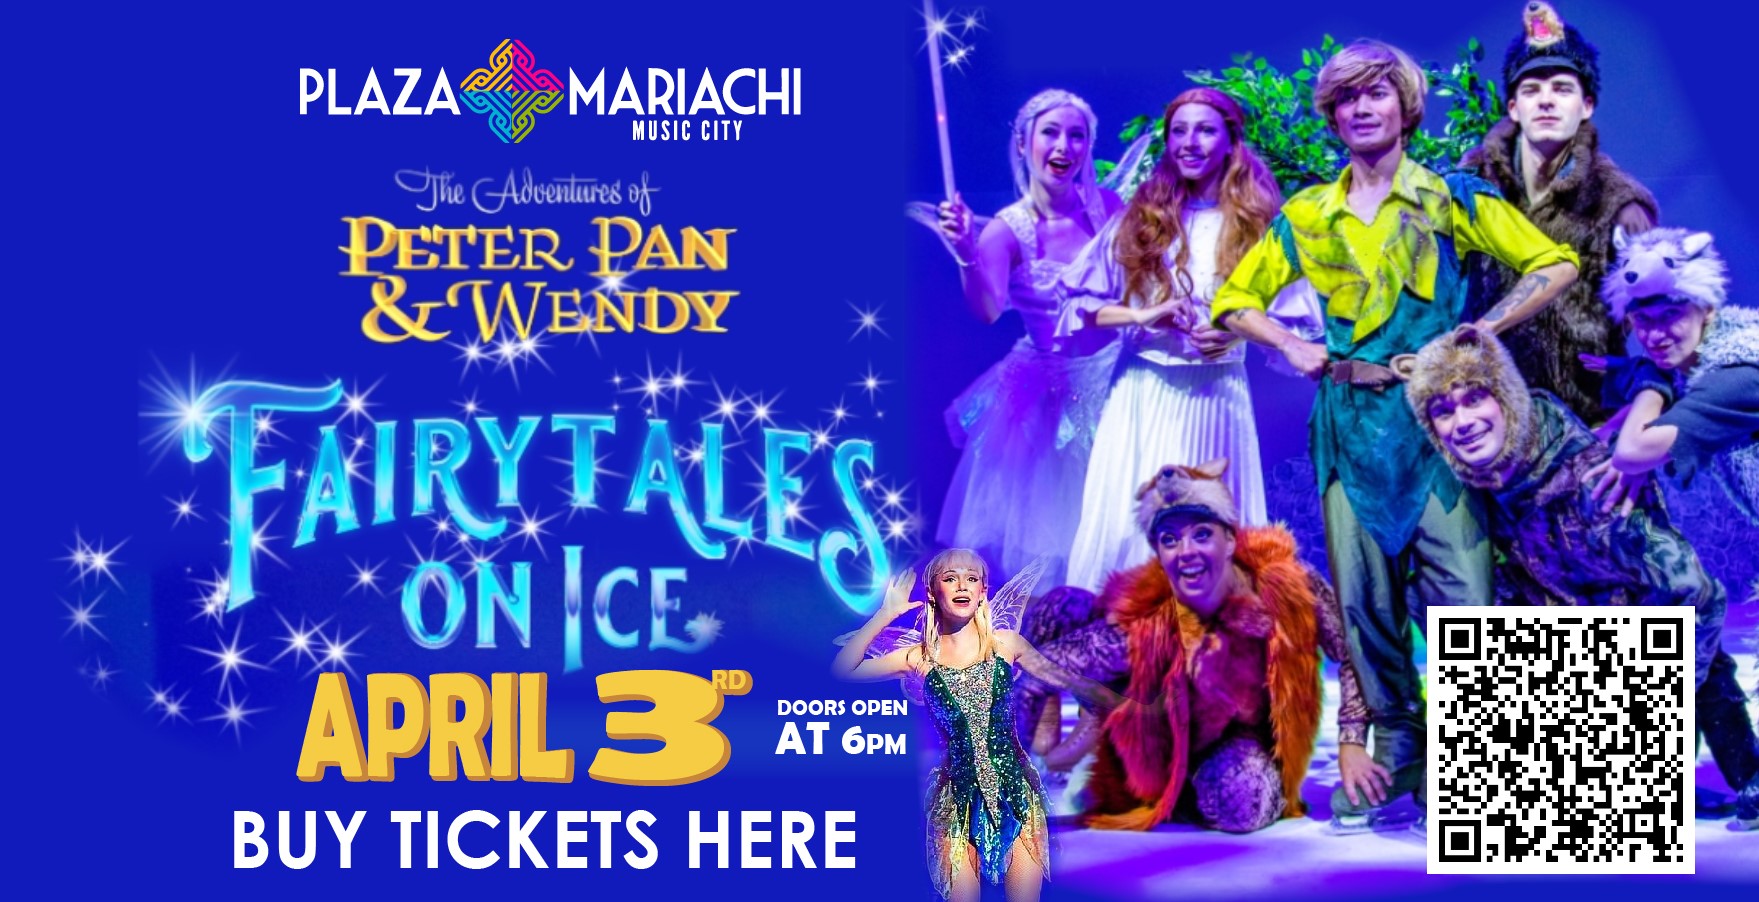 Click on this image to go to the site to purchase tickets for Fairytales on Ice